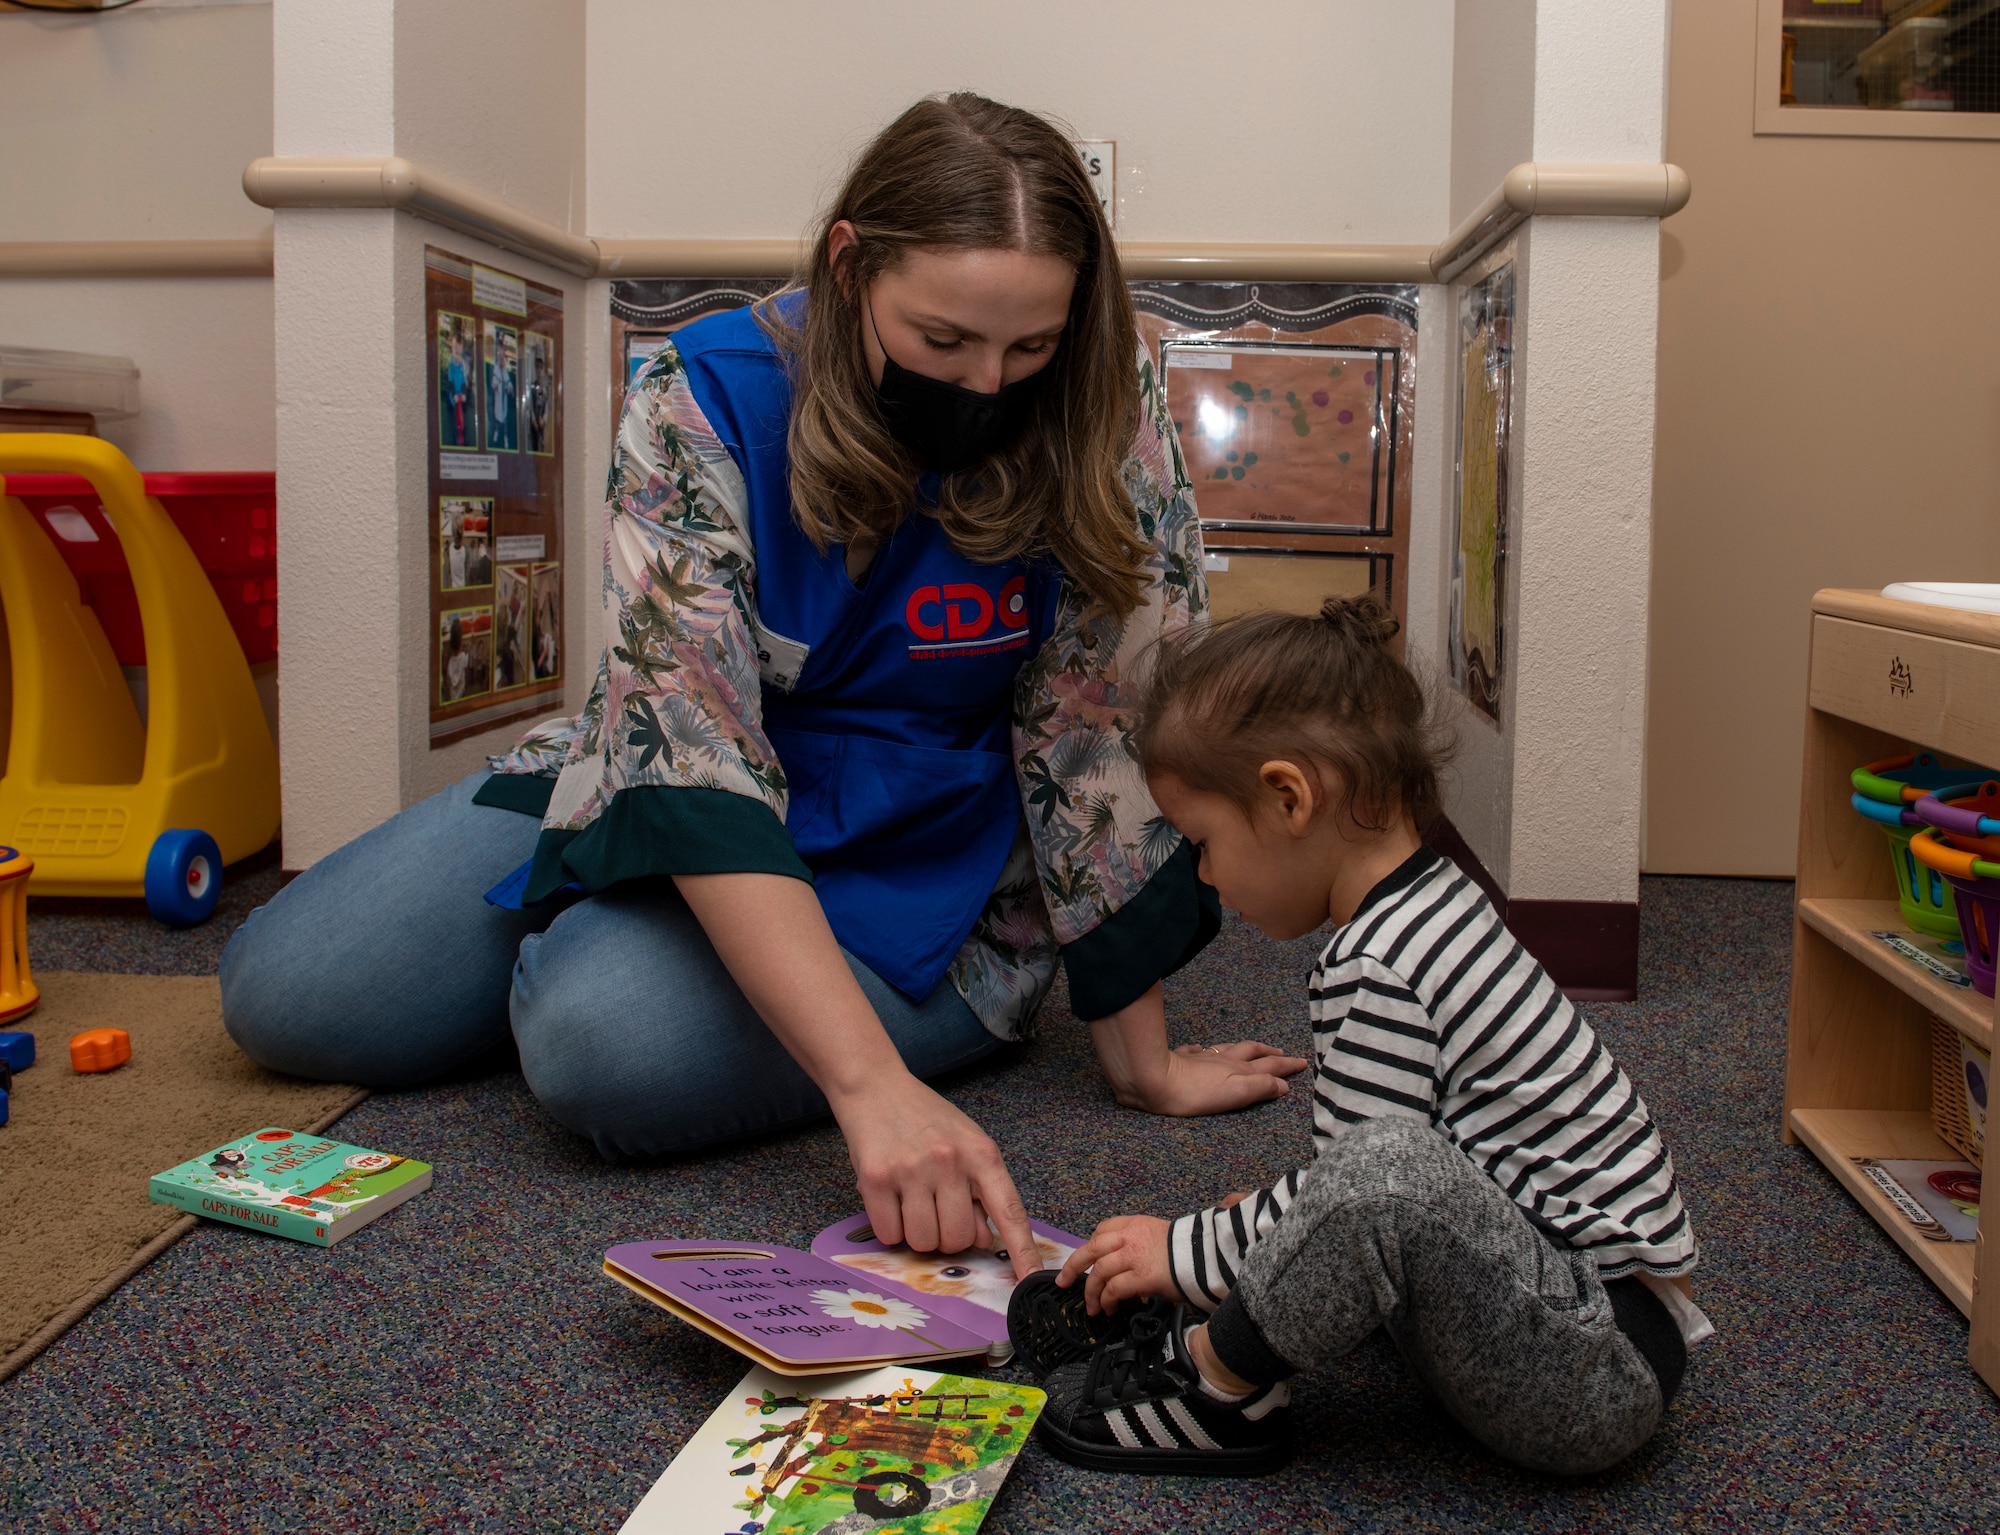 Emilia Williams, 60th Force Support Squadron child and youth program technician, helps a child read a book May 1, 2020, inside Child Development Center 3 at Travis Air Force Base, California. Travis AFB has three childcare centers that have cared for children during the coronavirus pandemic. (U.S. Air Force photo by Tech. Sgt. James Hodgman)